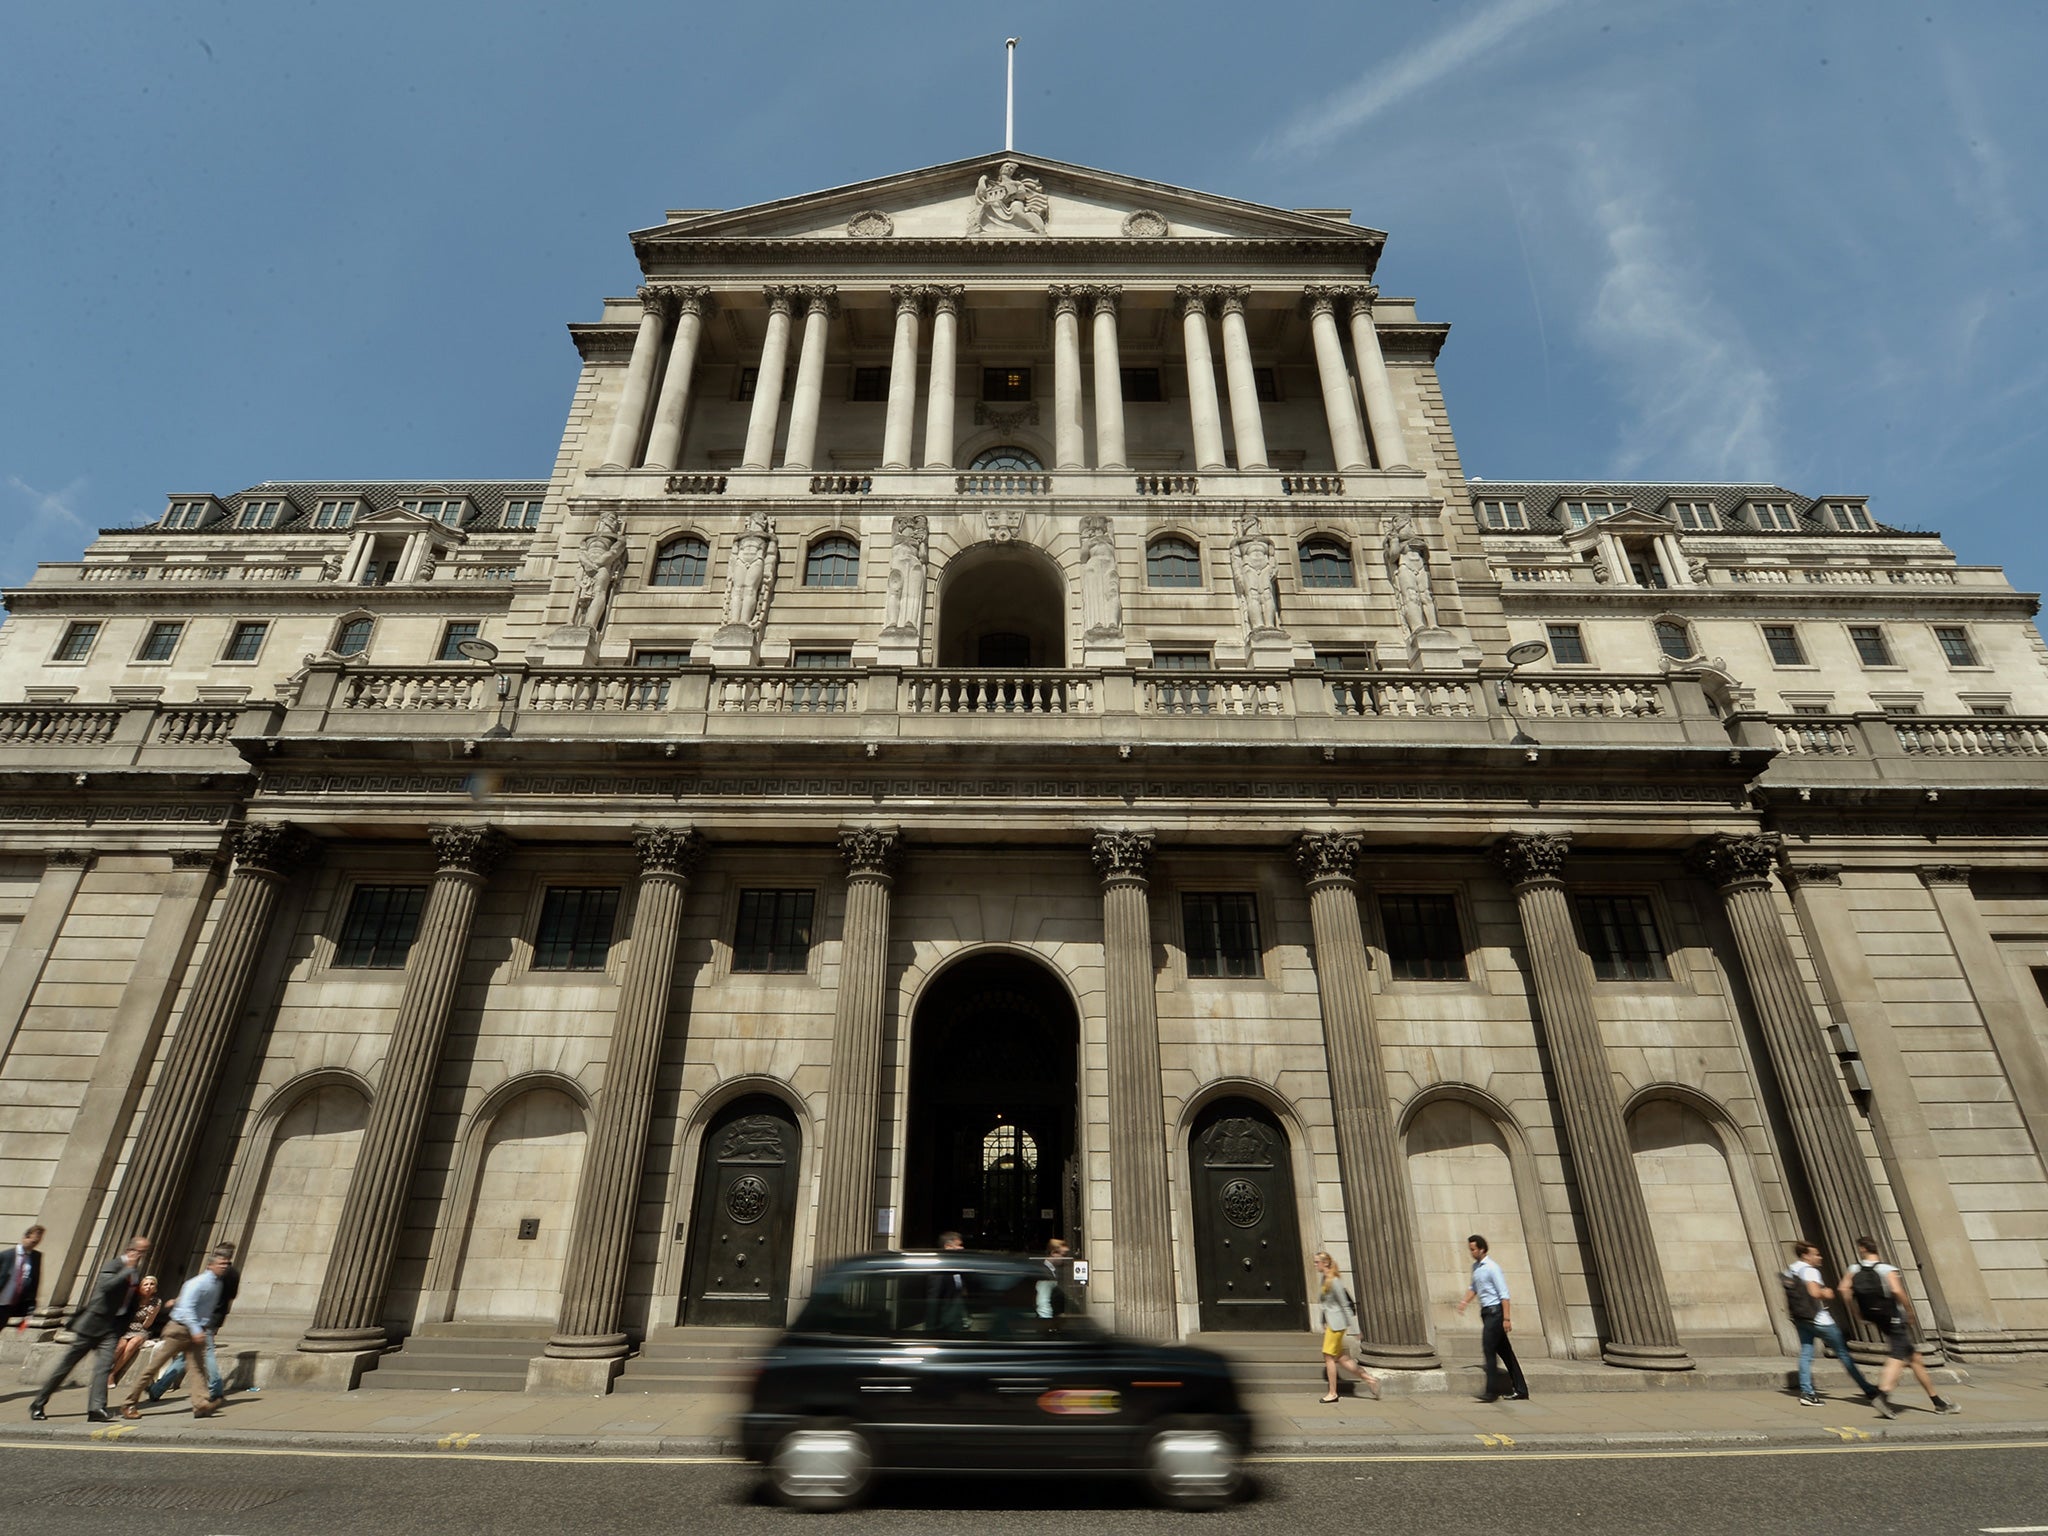 The 9 person MPC voted 8 to 1 to keep rates fixed at 0.5 per cent